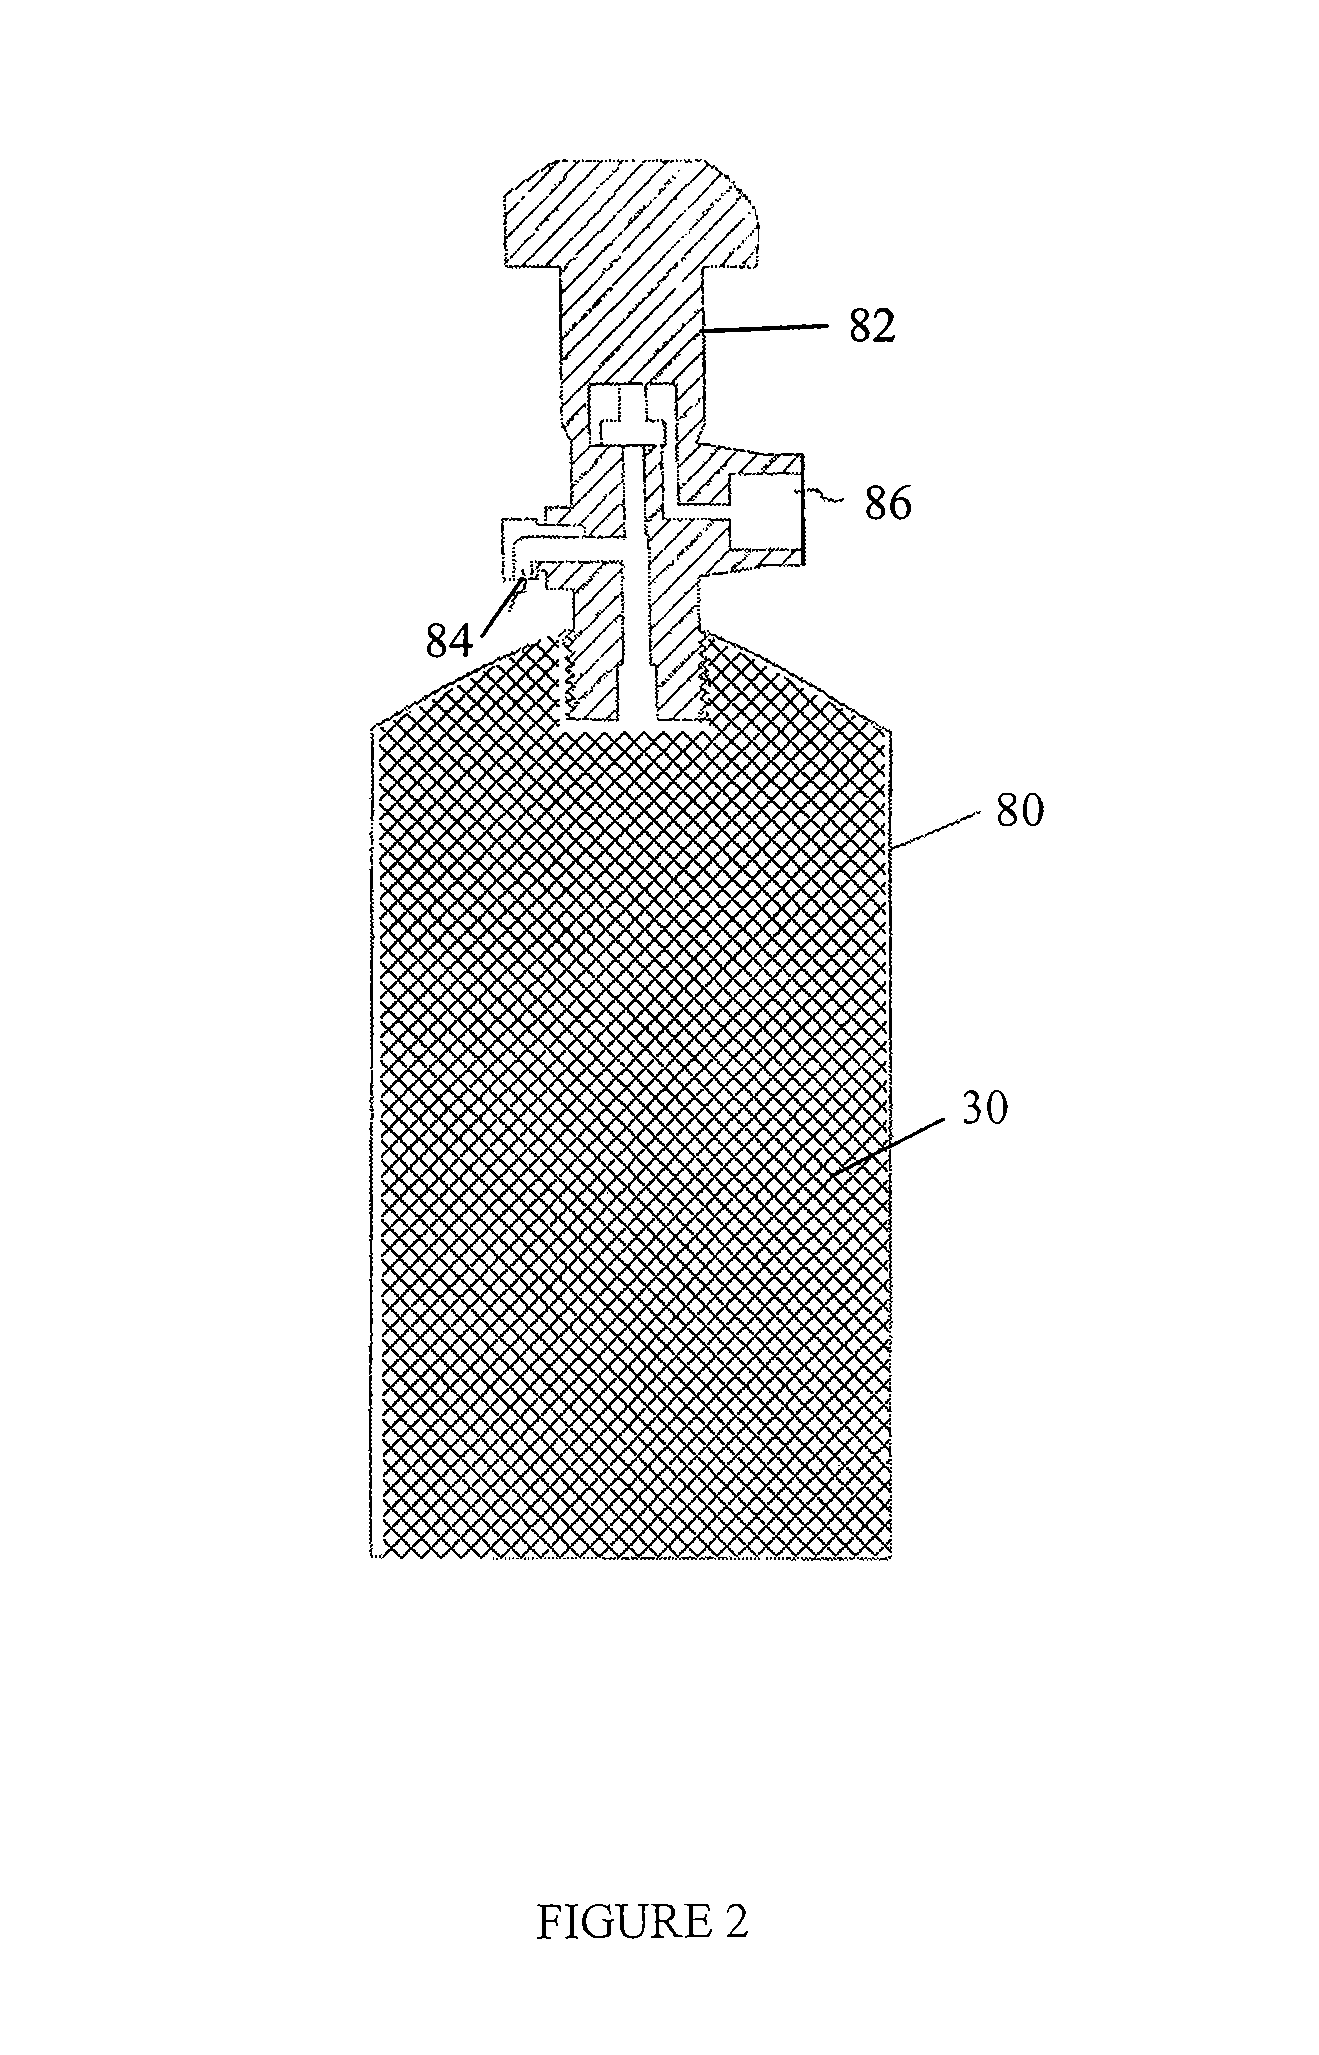 Polymerized polymeric fluid storage and purification method and system